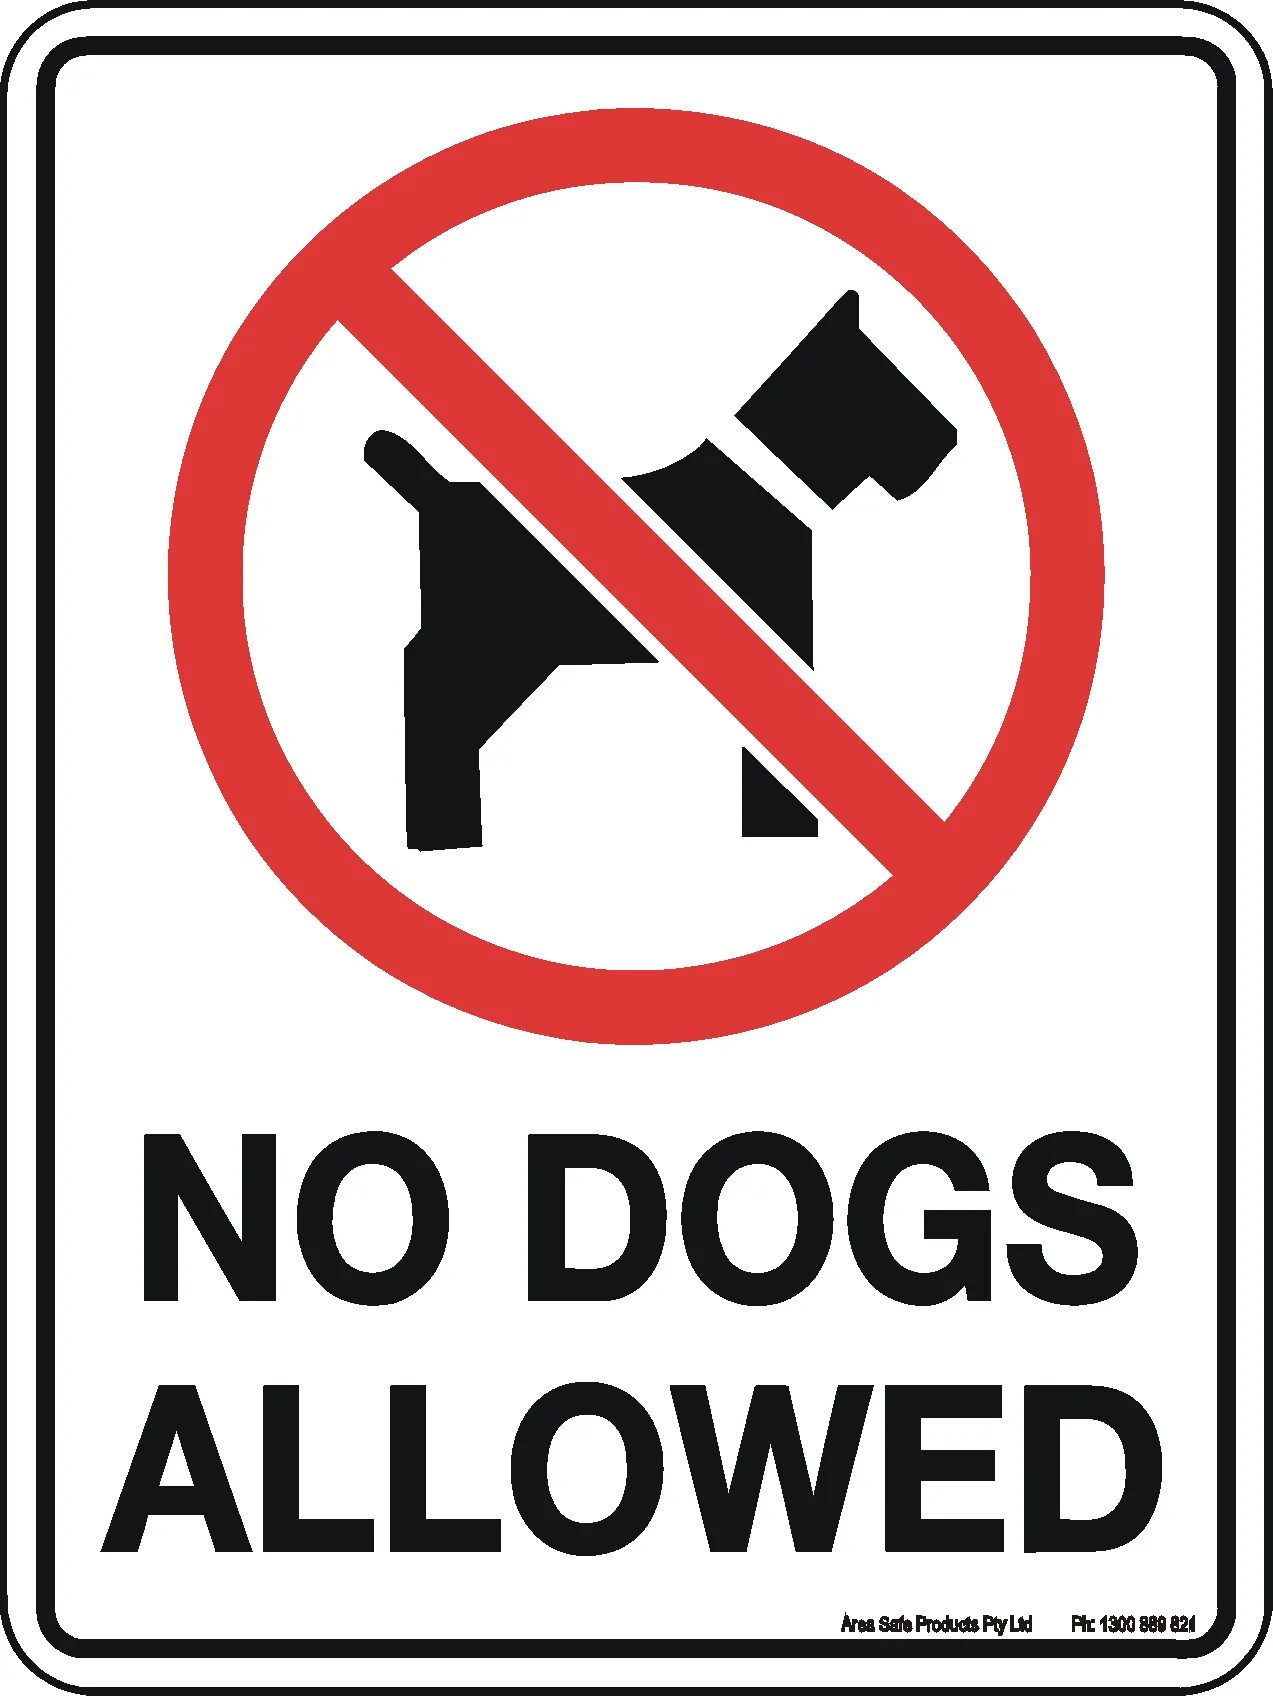 It s not allowed. No Dogs allowed. No Dogs allowed sign. Знак Russians and Dogs are not allowed. Not allowed Dog.